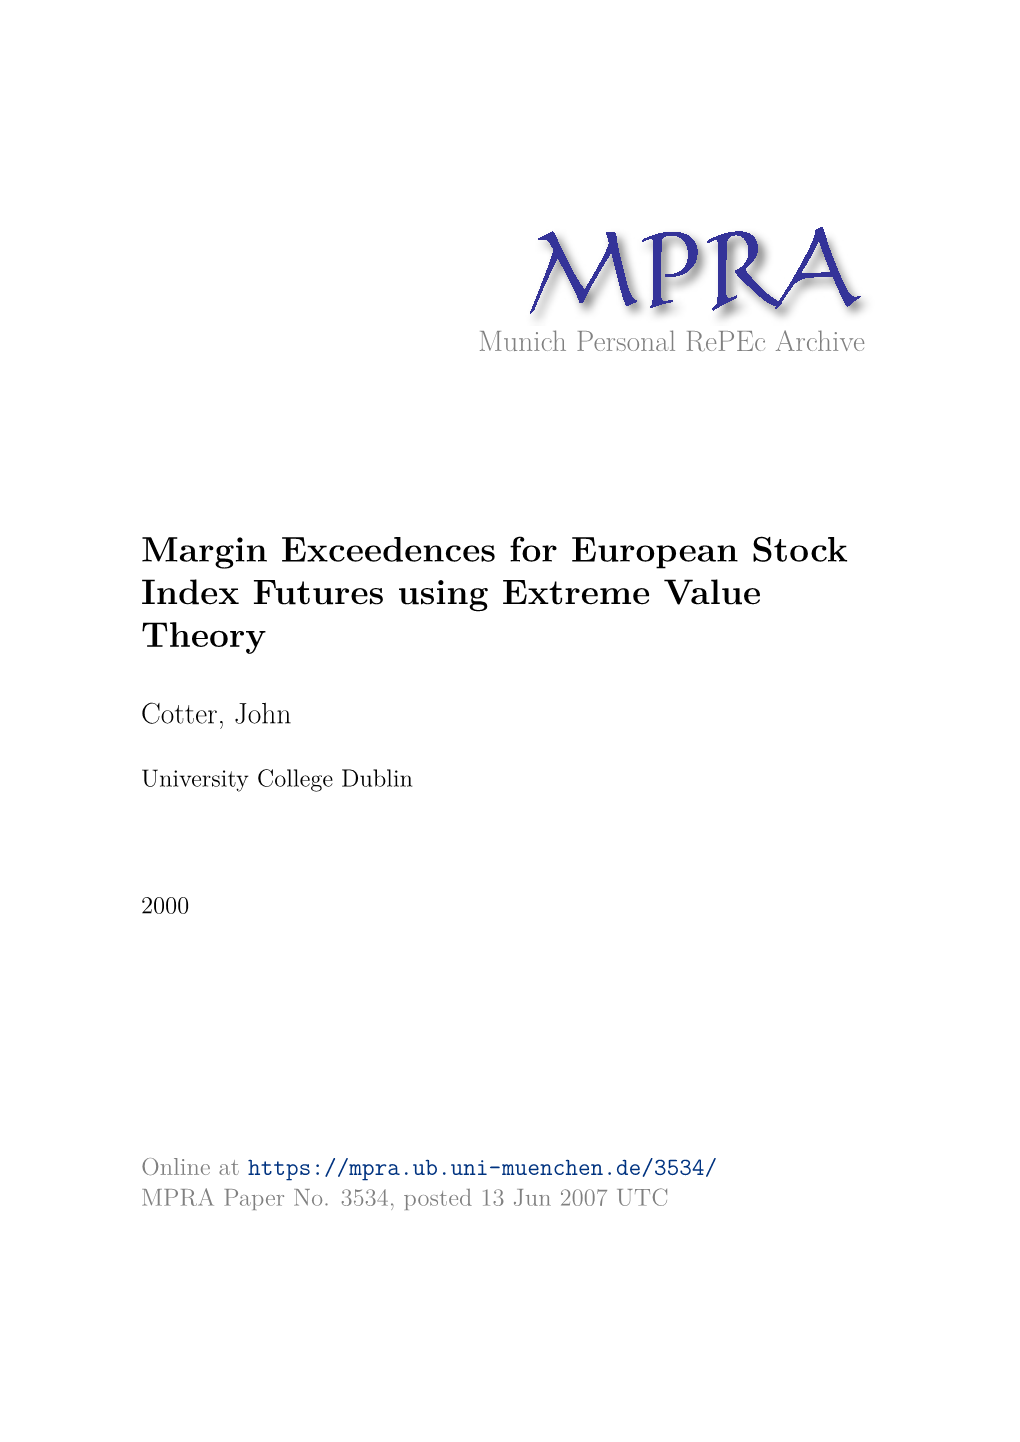 Margin Exceedences for European Stock Index Futures Using Extreme Value Theory